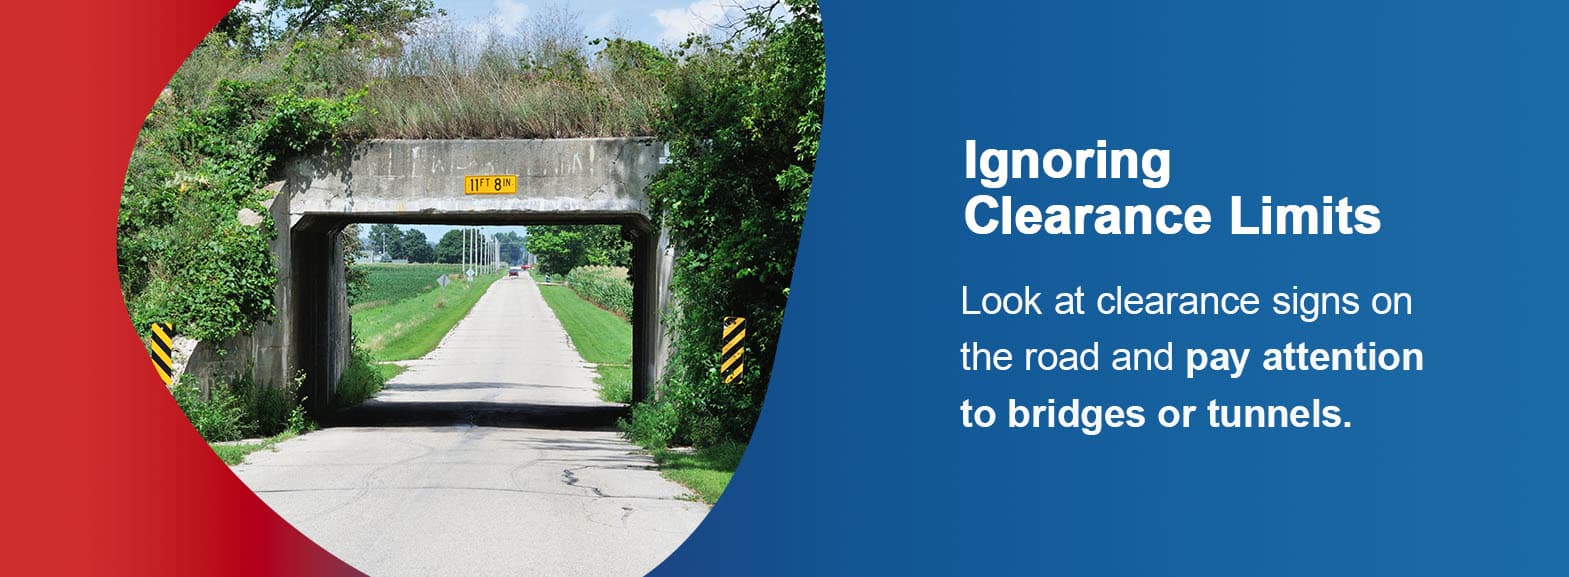 Ignoring Clearance Limits. Look at clearance signs on the road and pay attention to bridges or tunnels. 